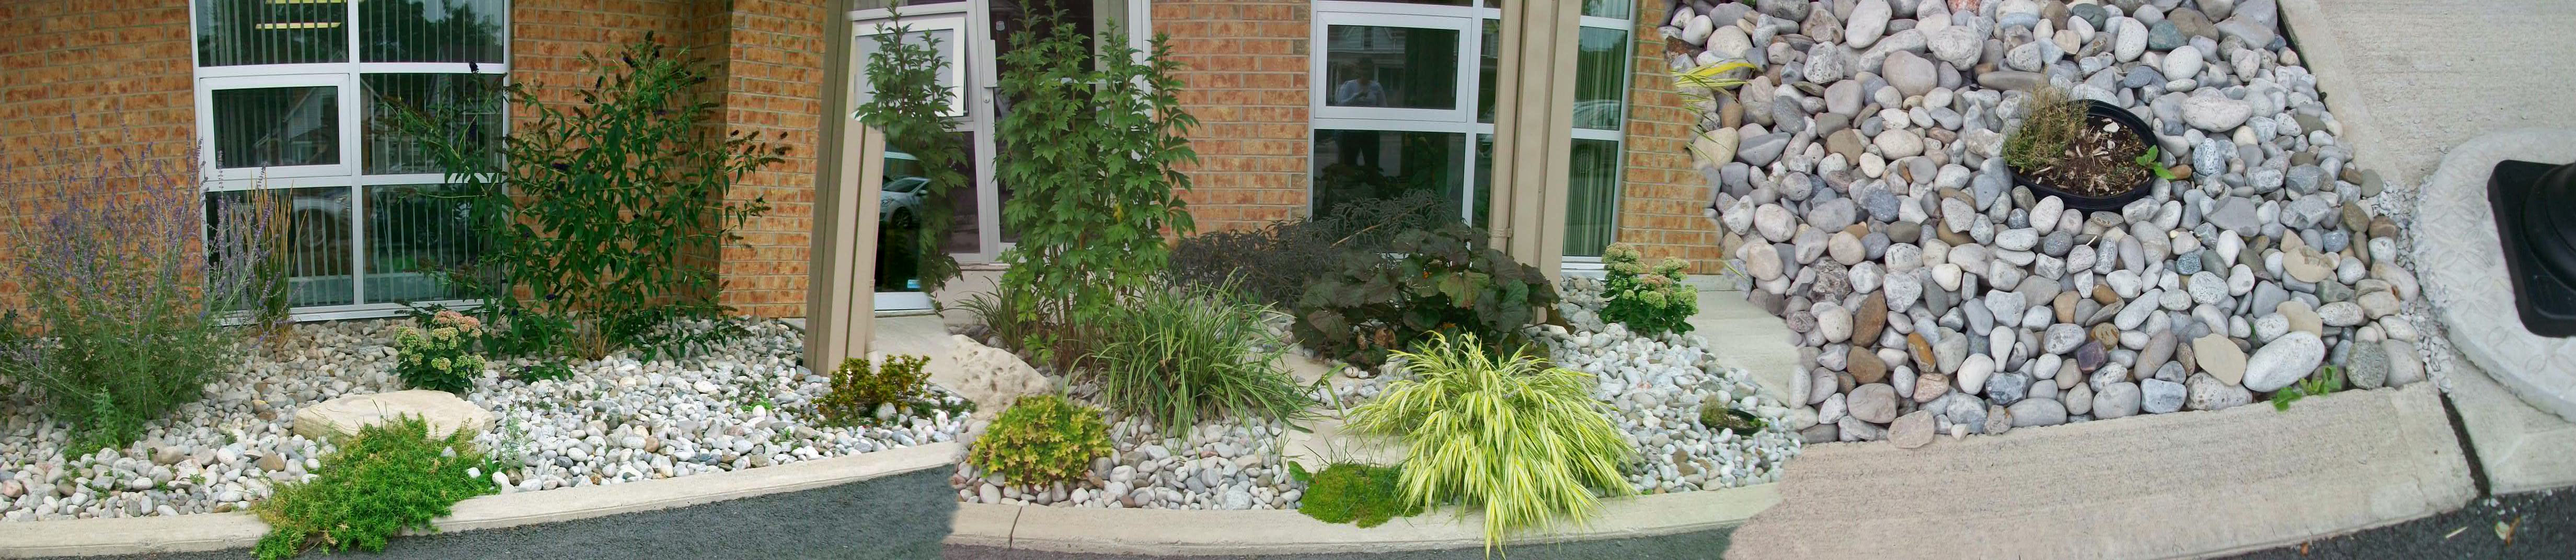 Landscaping featuring some light coloured rocks, shrubs and green plants